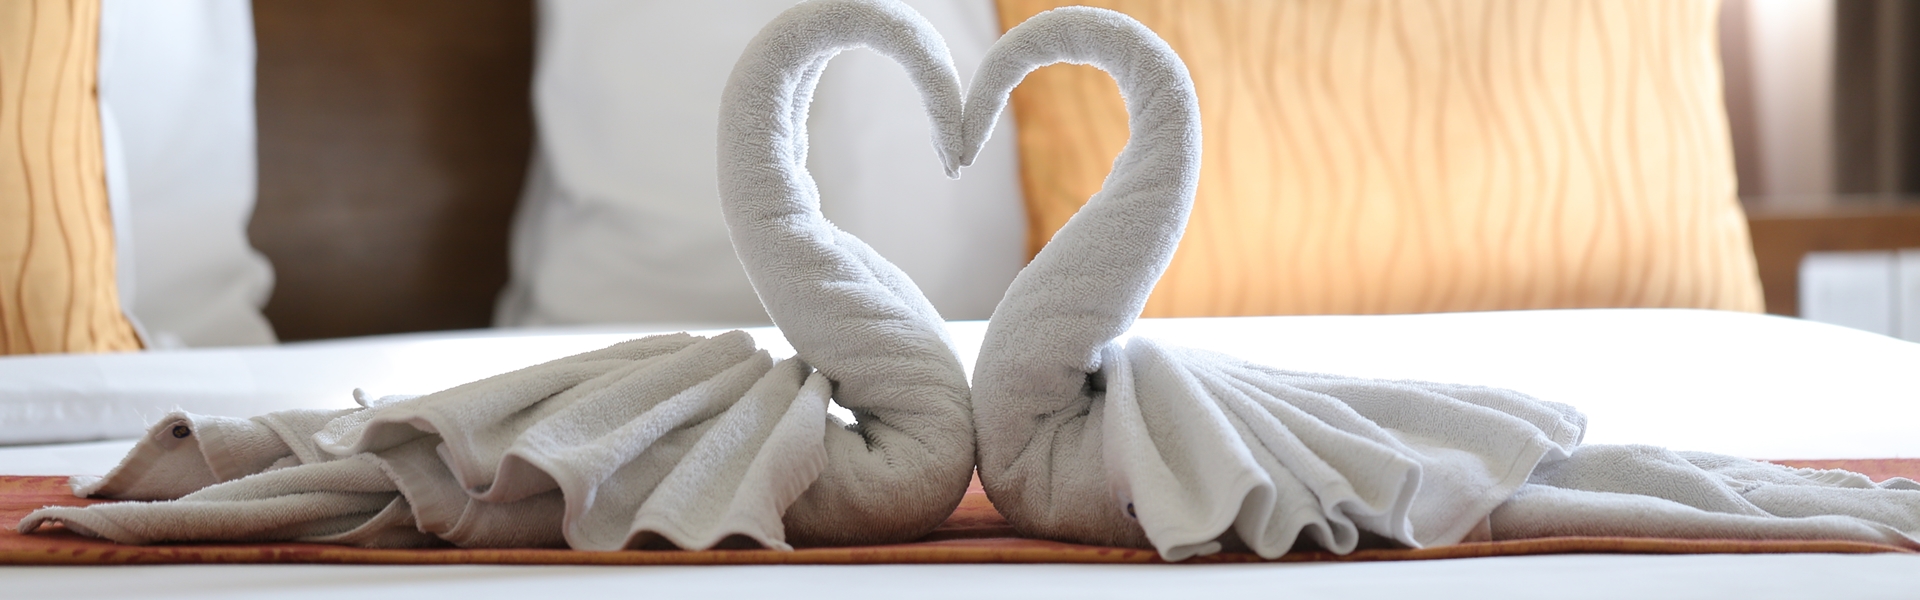 Two Swans Made Of Towels Forming Heart Shape On Bed In Honeymoon